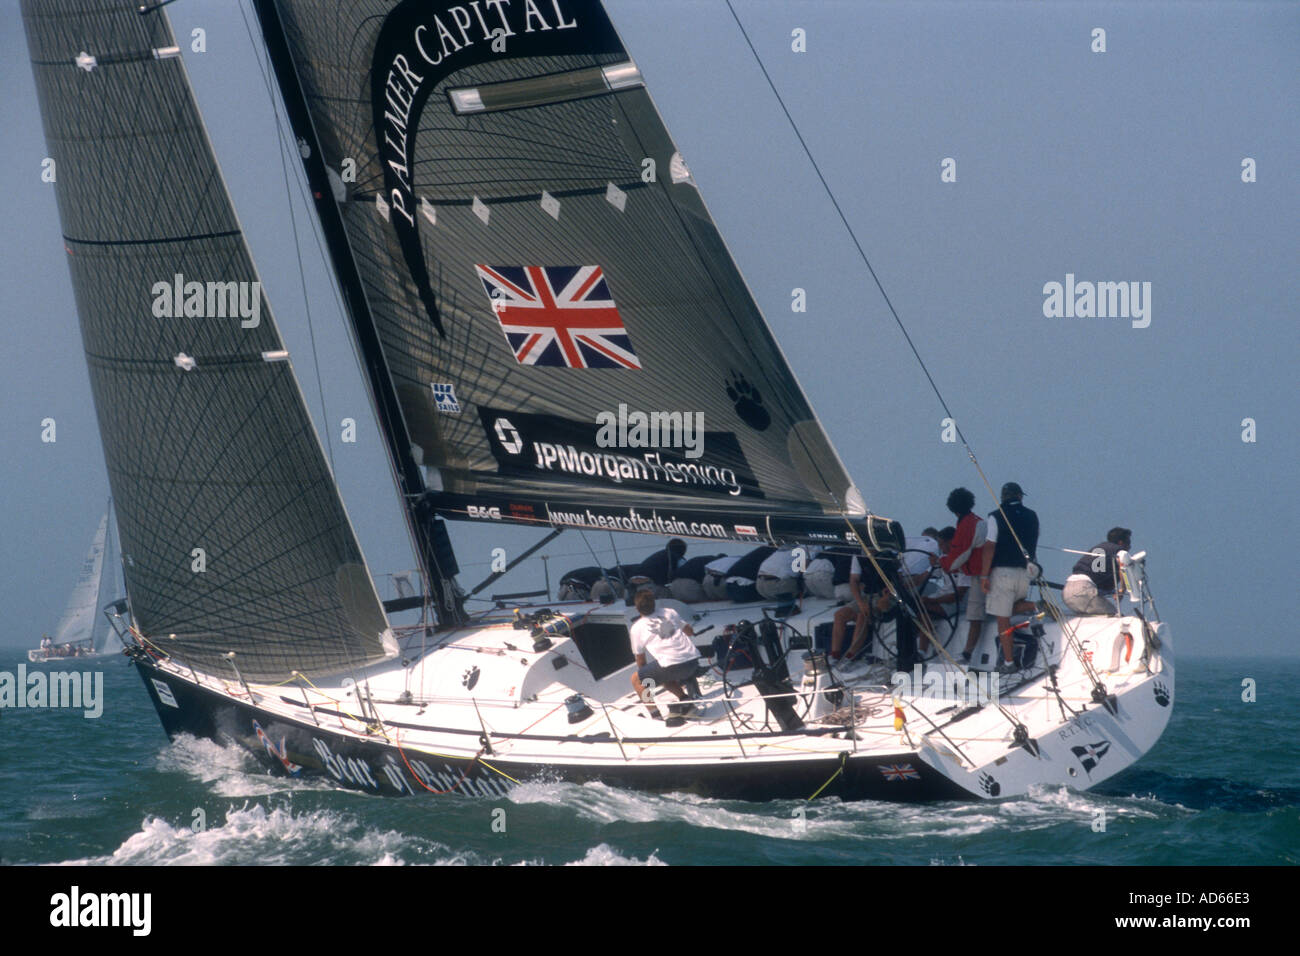 The Farr 52 design yacht Bear of Britian racing off the Isle of Wight Hampshire England during Cowes Week Stock Photo